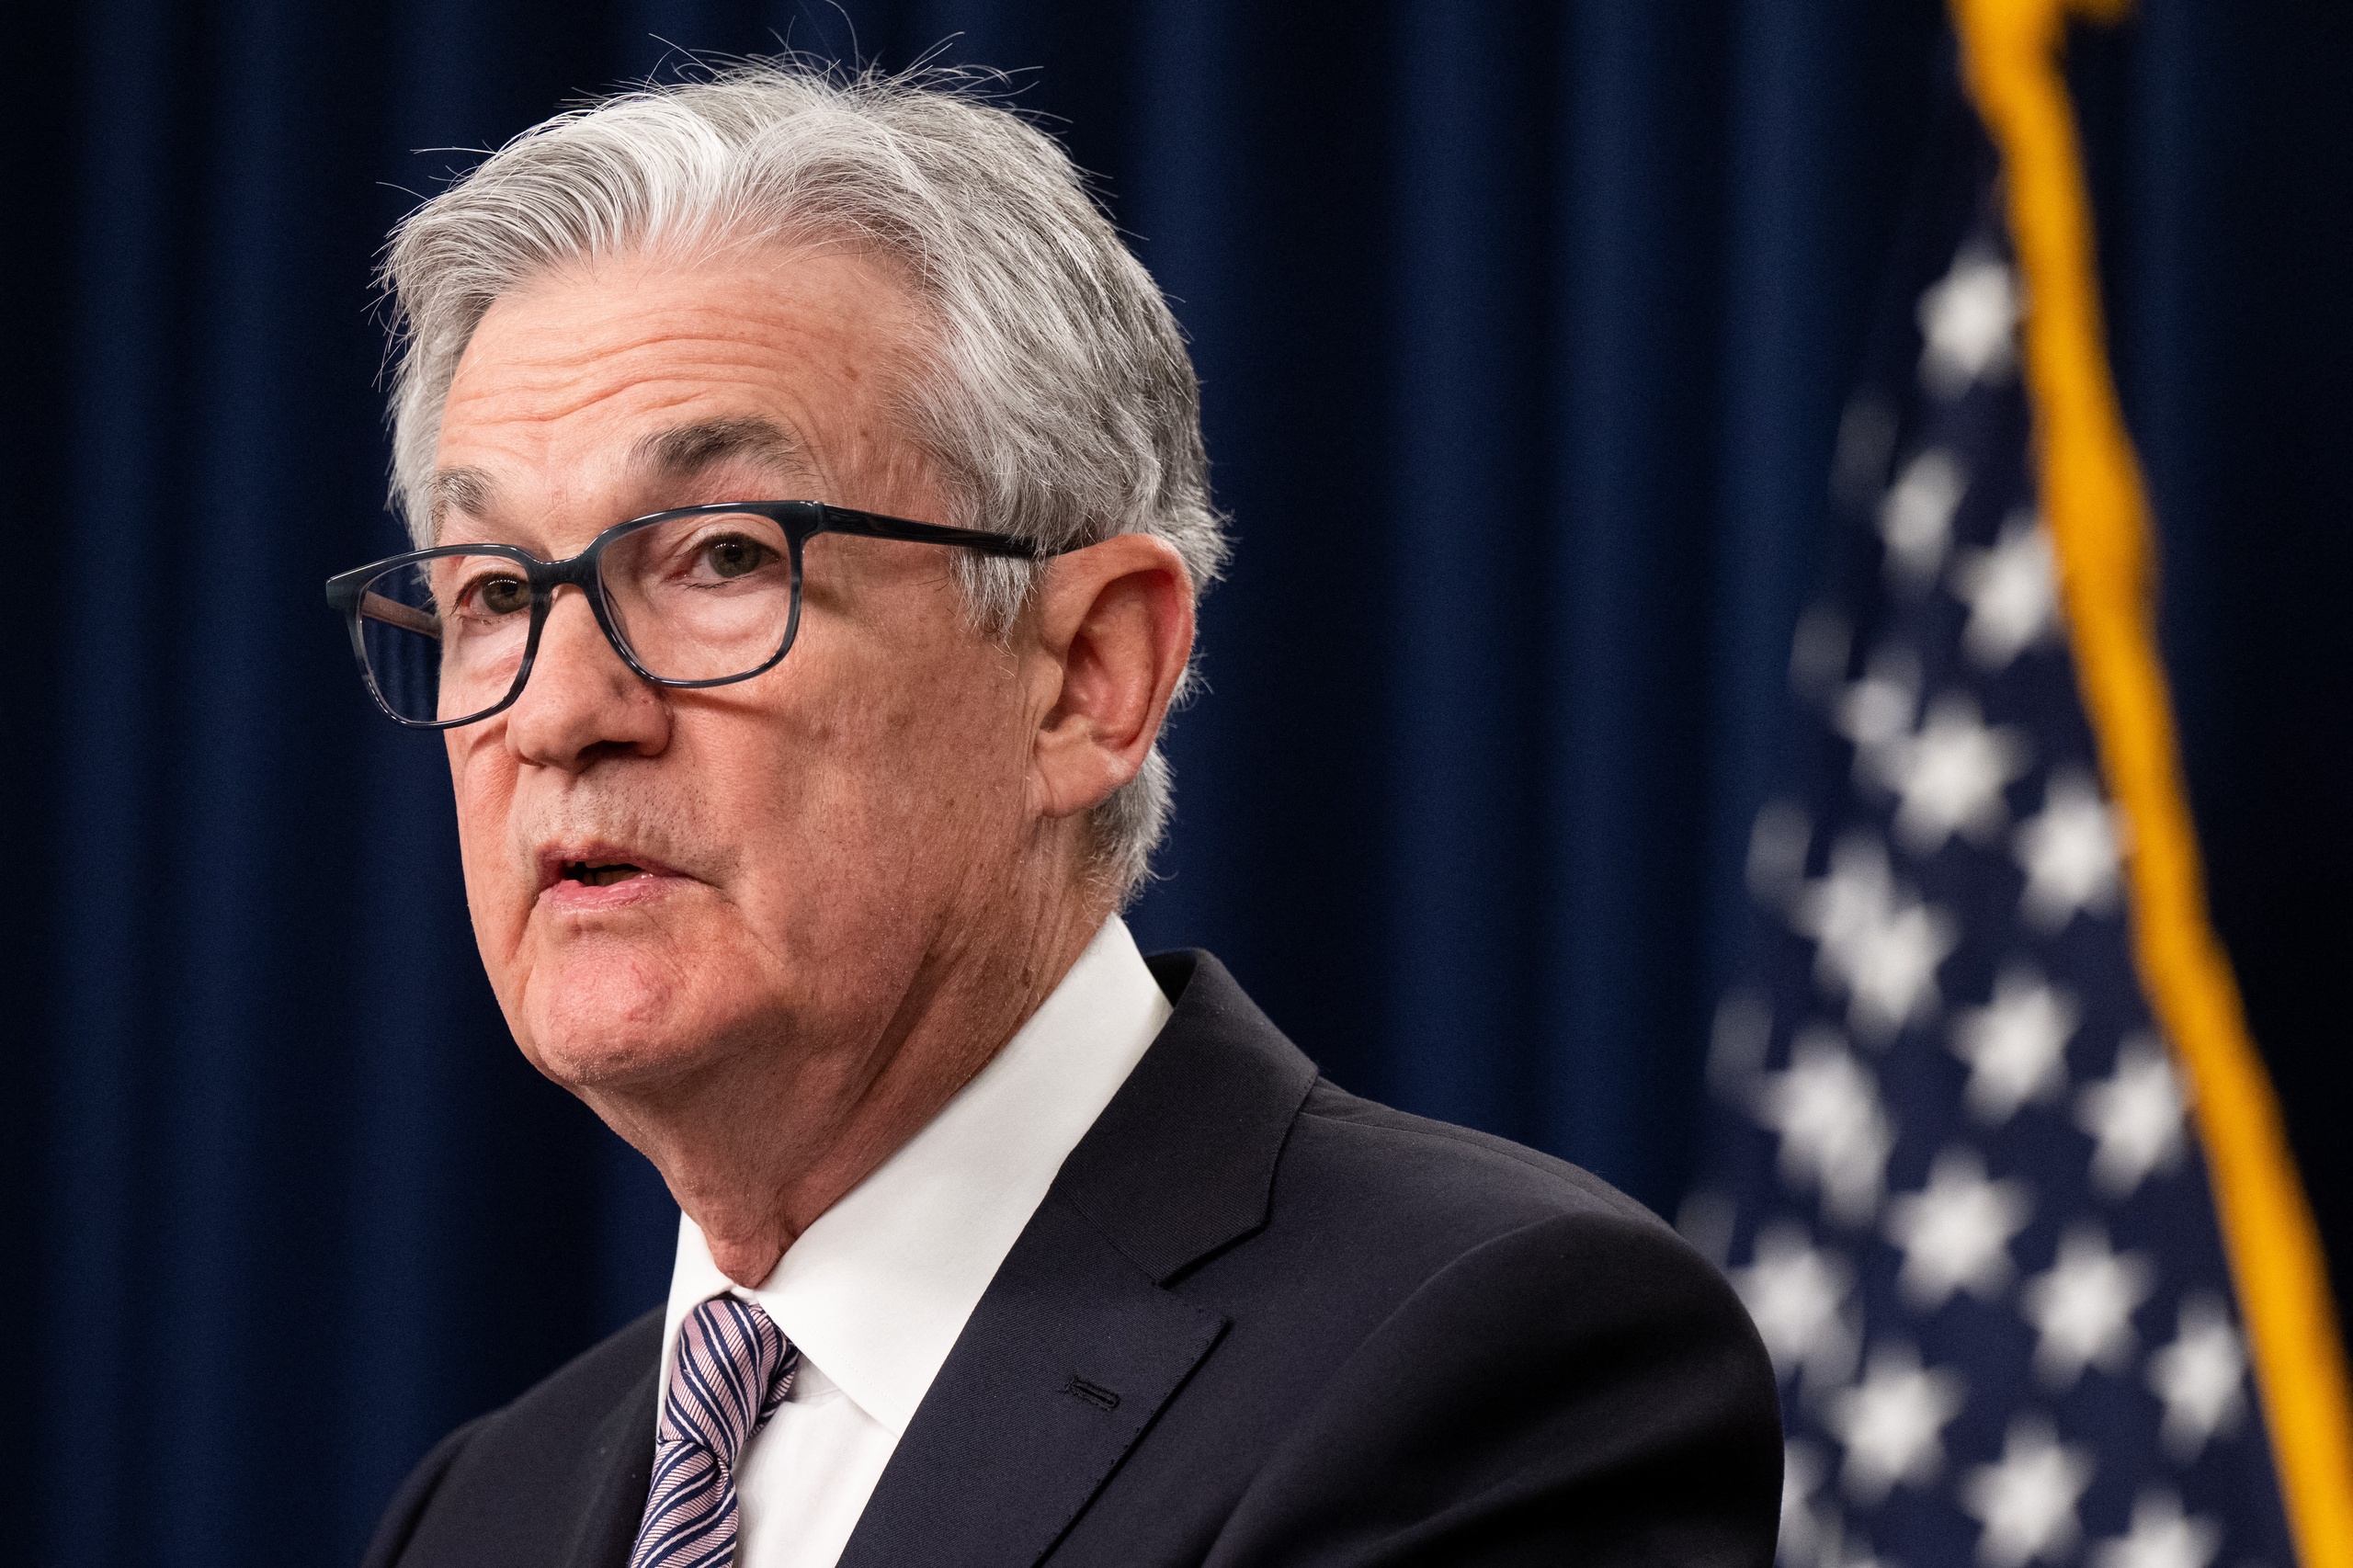 The Federal Reserve has again raised US interest rates by a quarter of a percentage point.  As a result, the key interest rate in the US is now between 5 and 5.25 percent.  But that may have been the last rate hike.  US Federal Reserve policymakers say further increases will depend on how the economy develops.